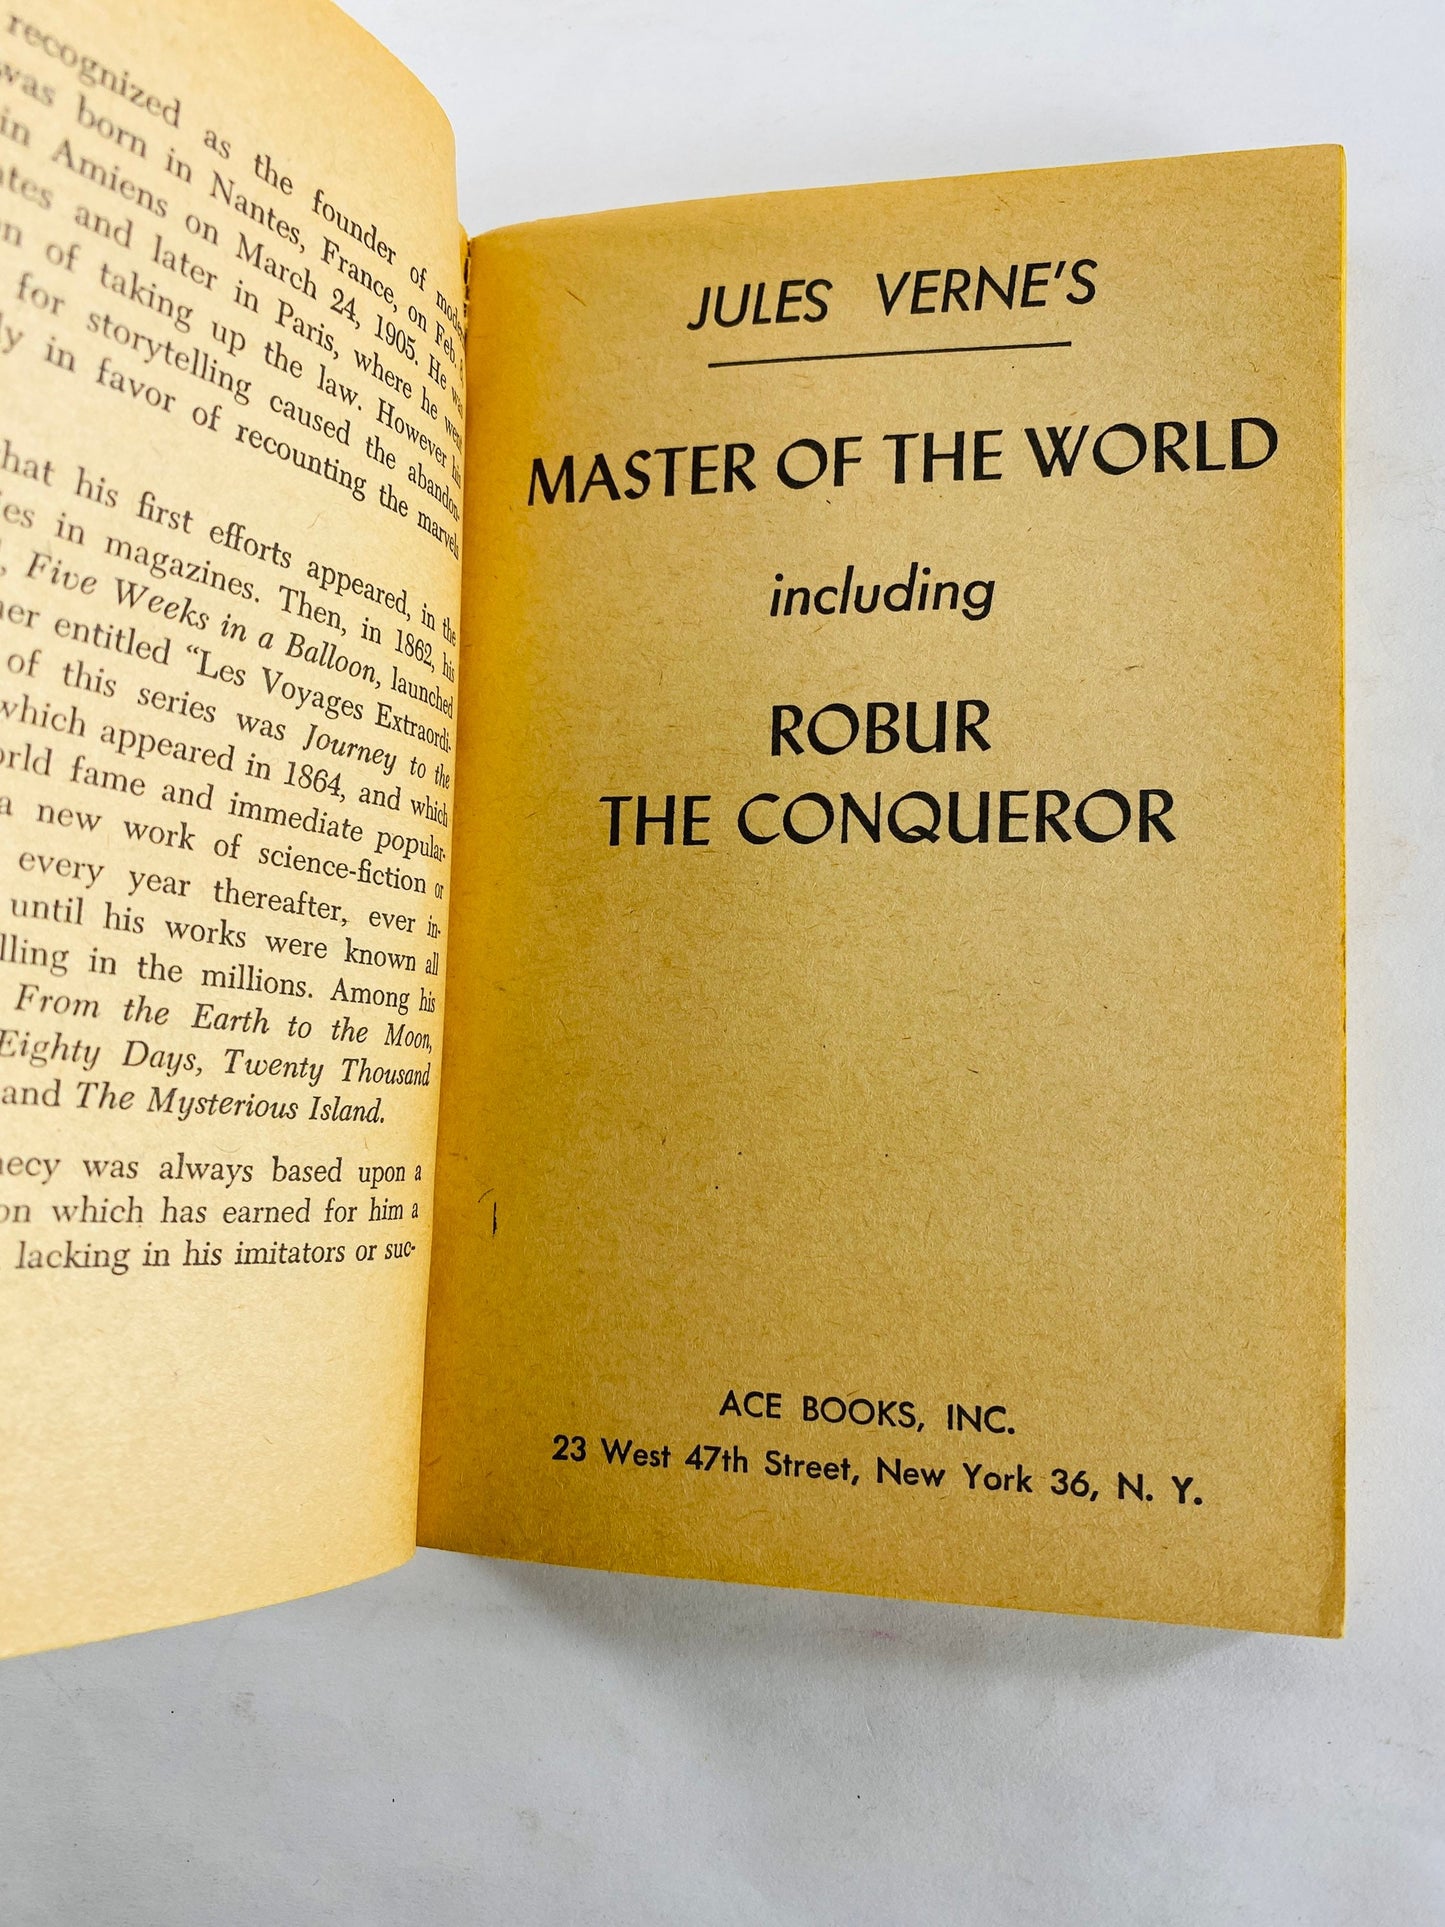 1951 Jules Verne Master of the World vintage paperback book by author of Twenty Thousand Leagues Under the Sea. Ace Science Fiction Classic